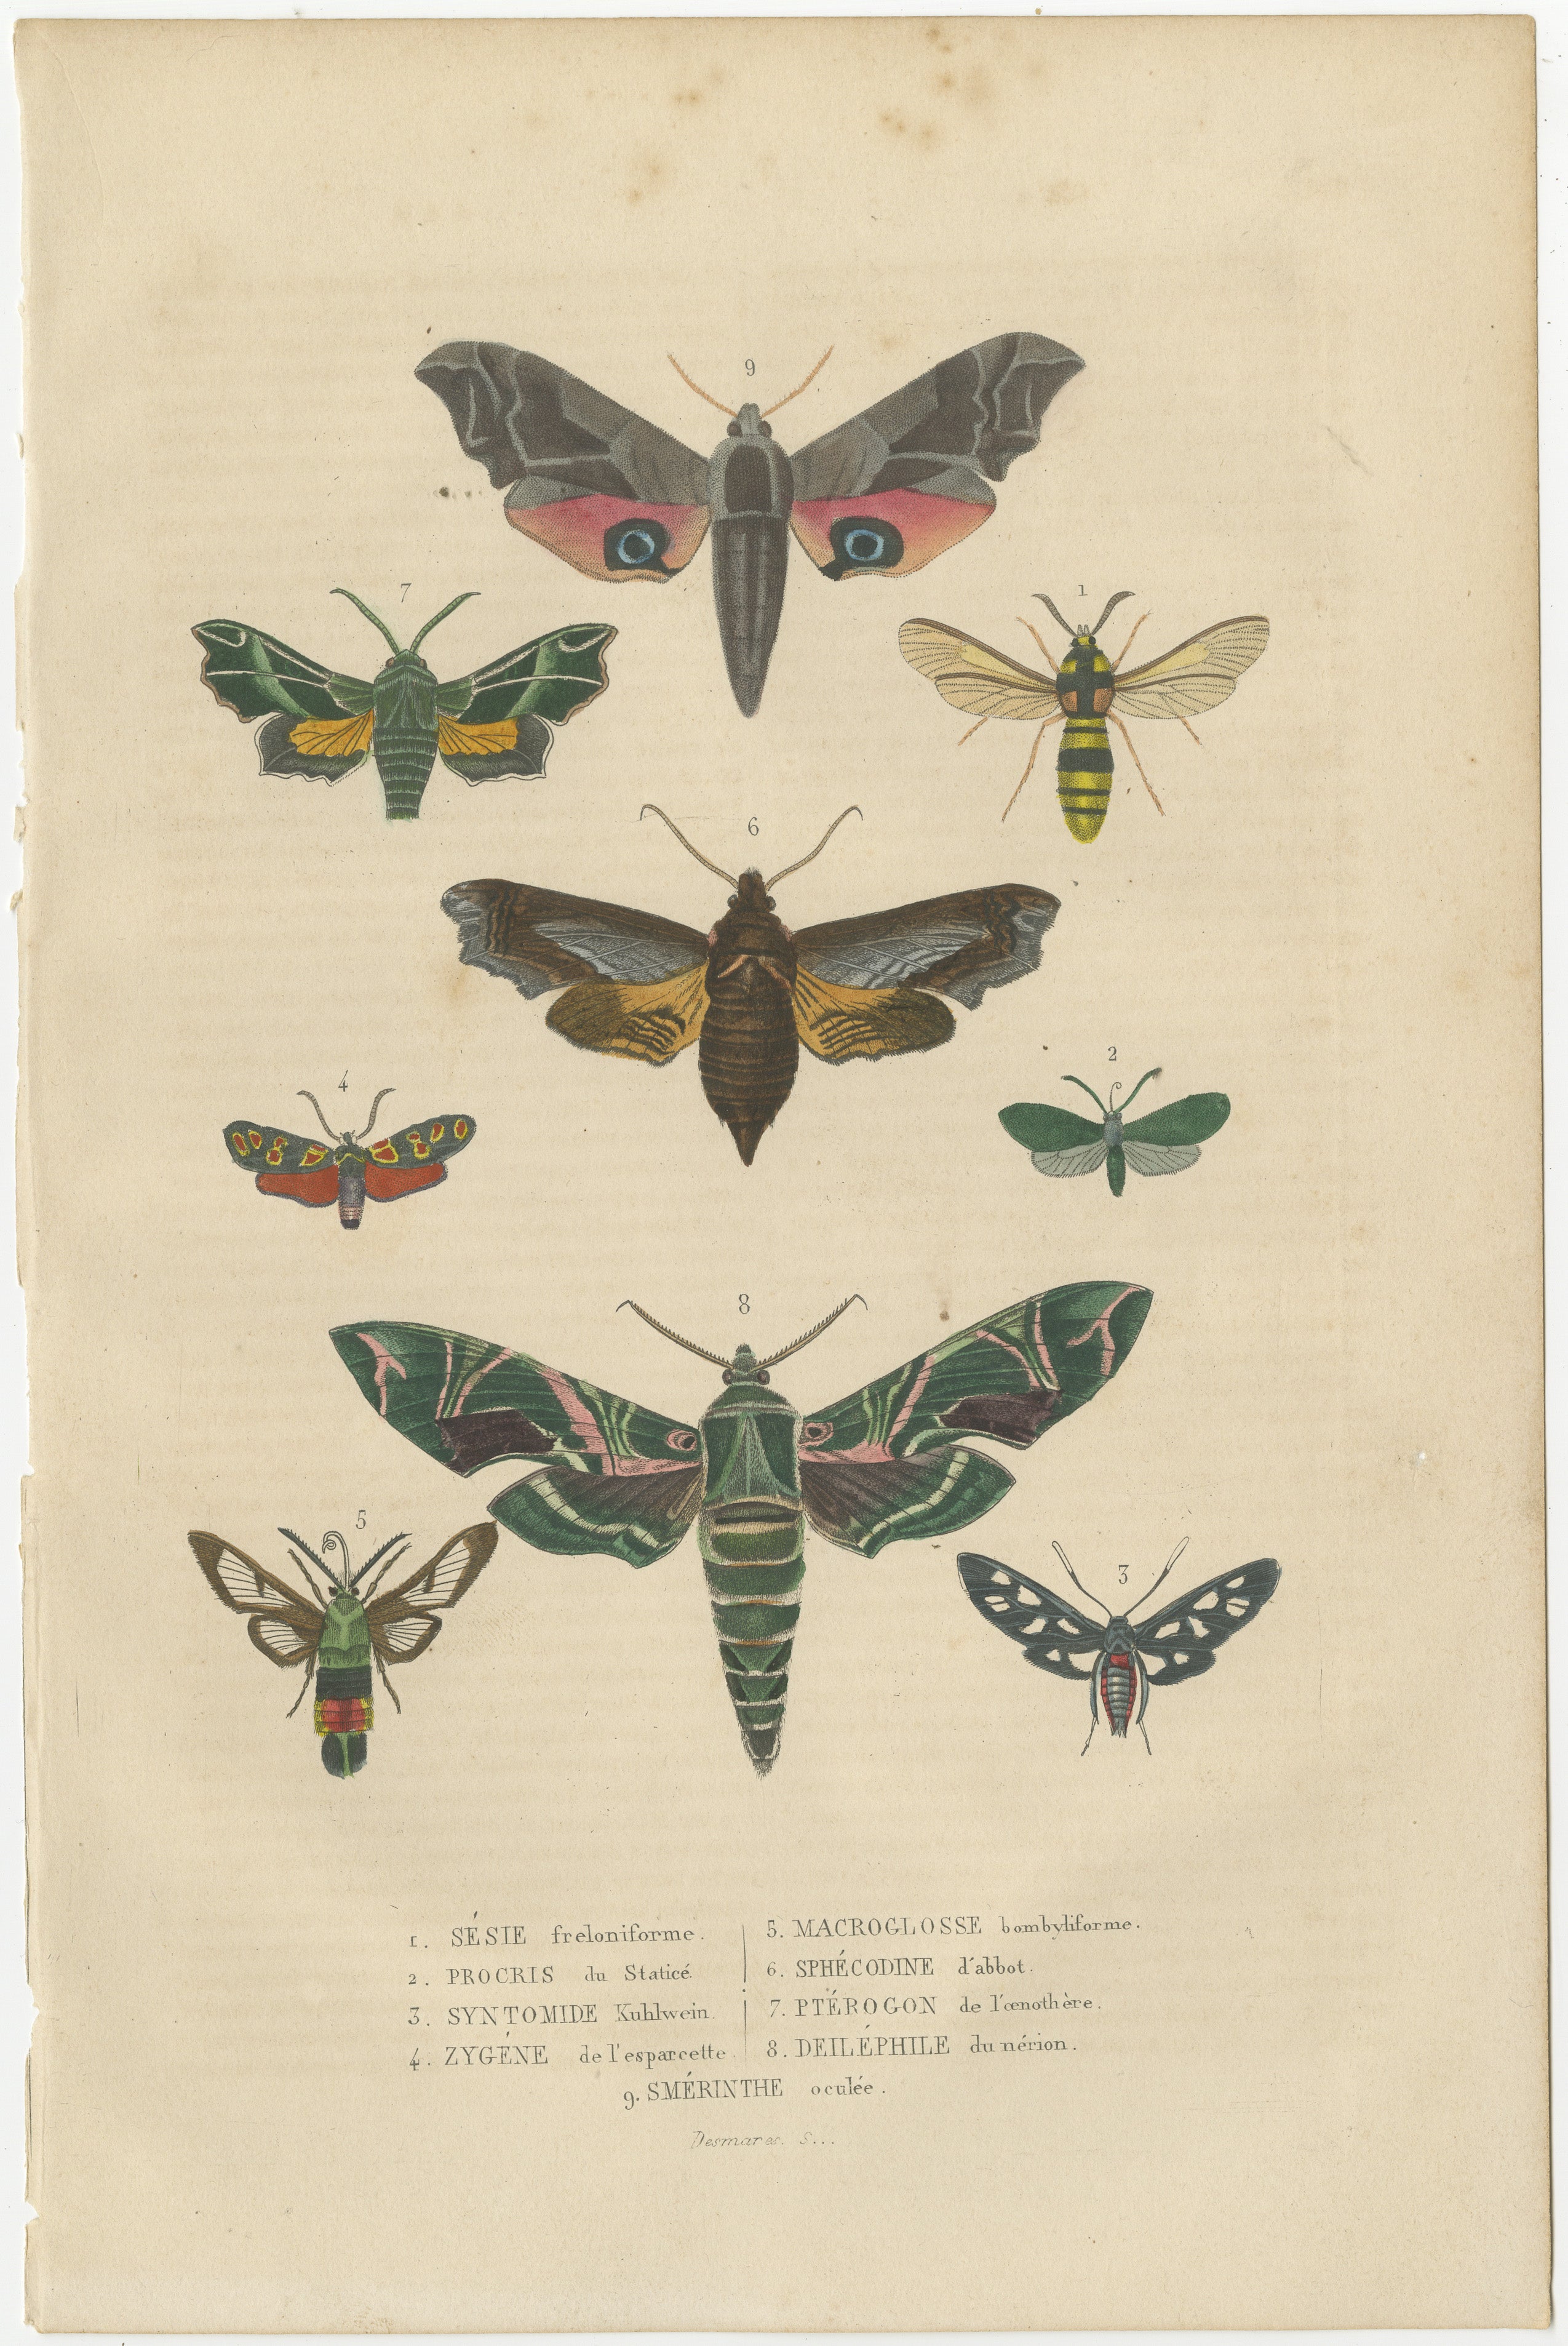 An antique hand-colored engraving. This particular illustration focuses on various moth and butterfly species, showcasing their wing patterns and body shapes in vibrant colors and with a high level of detail.

The different specimens are numbered